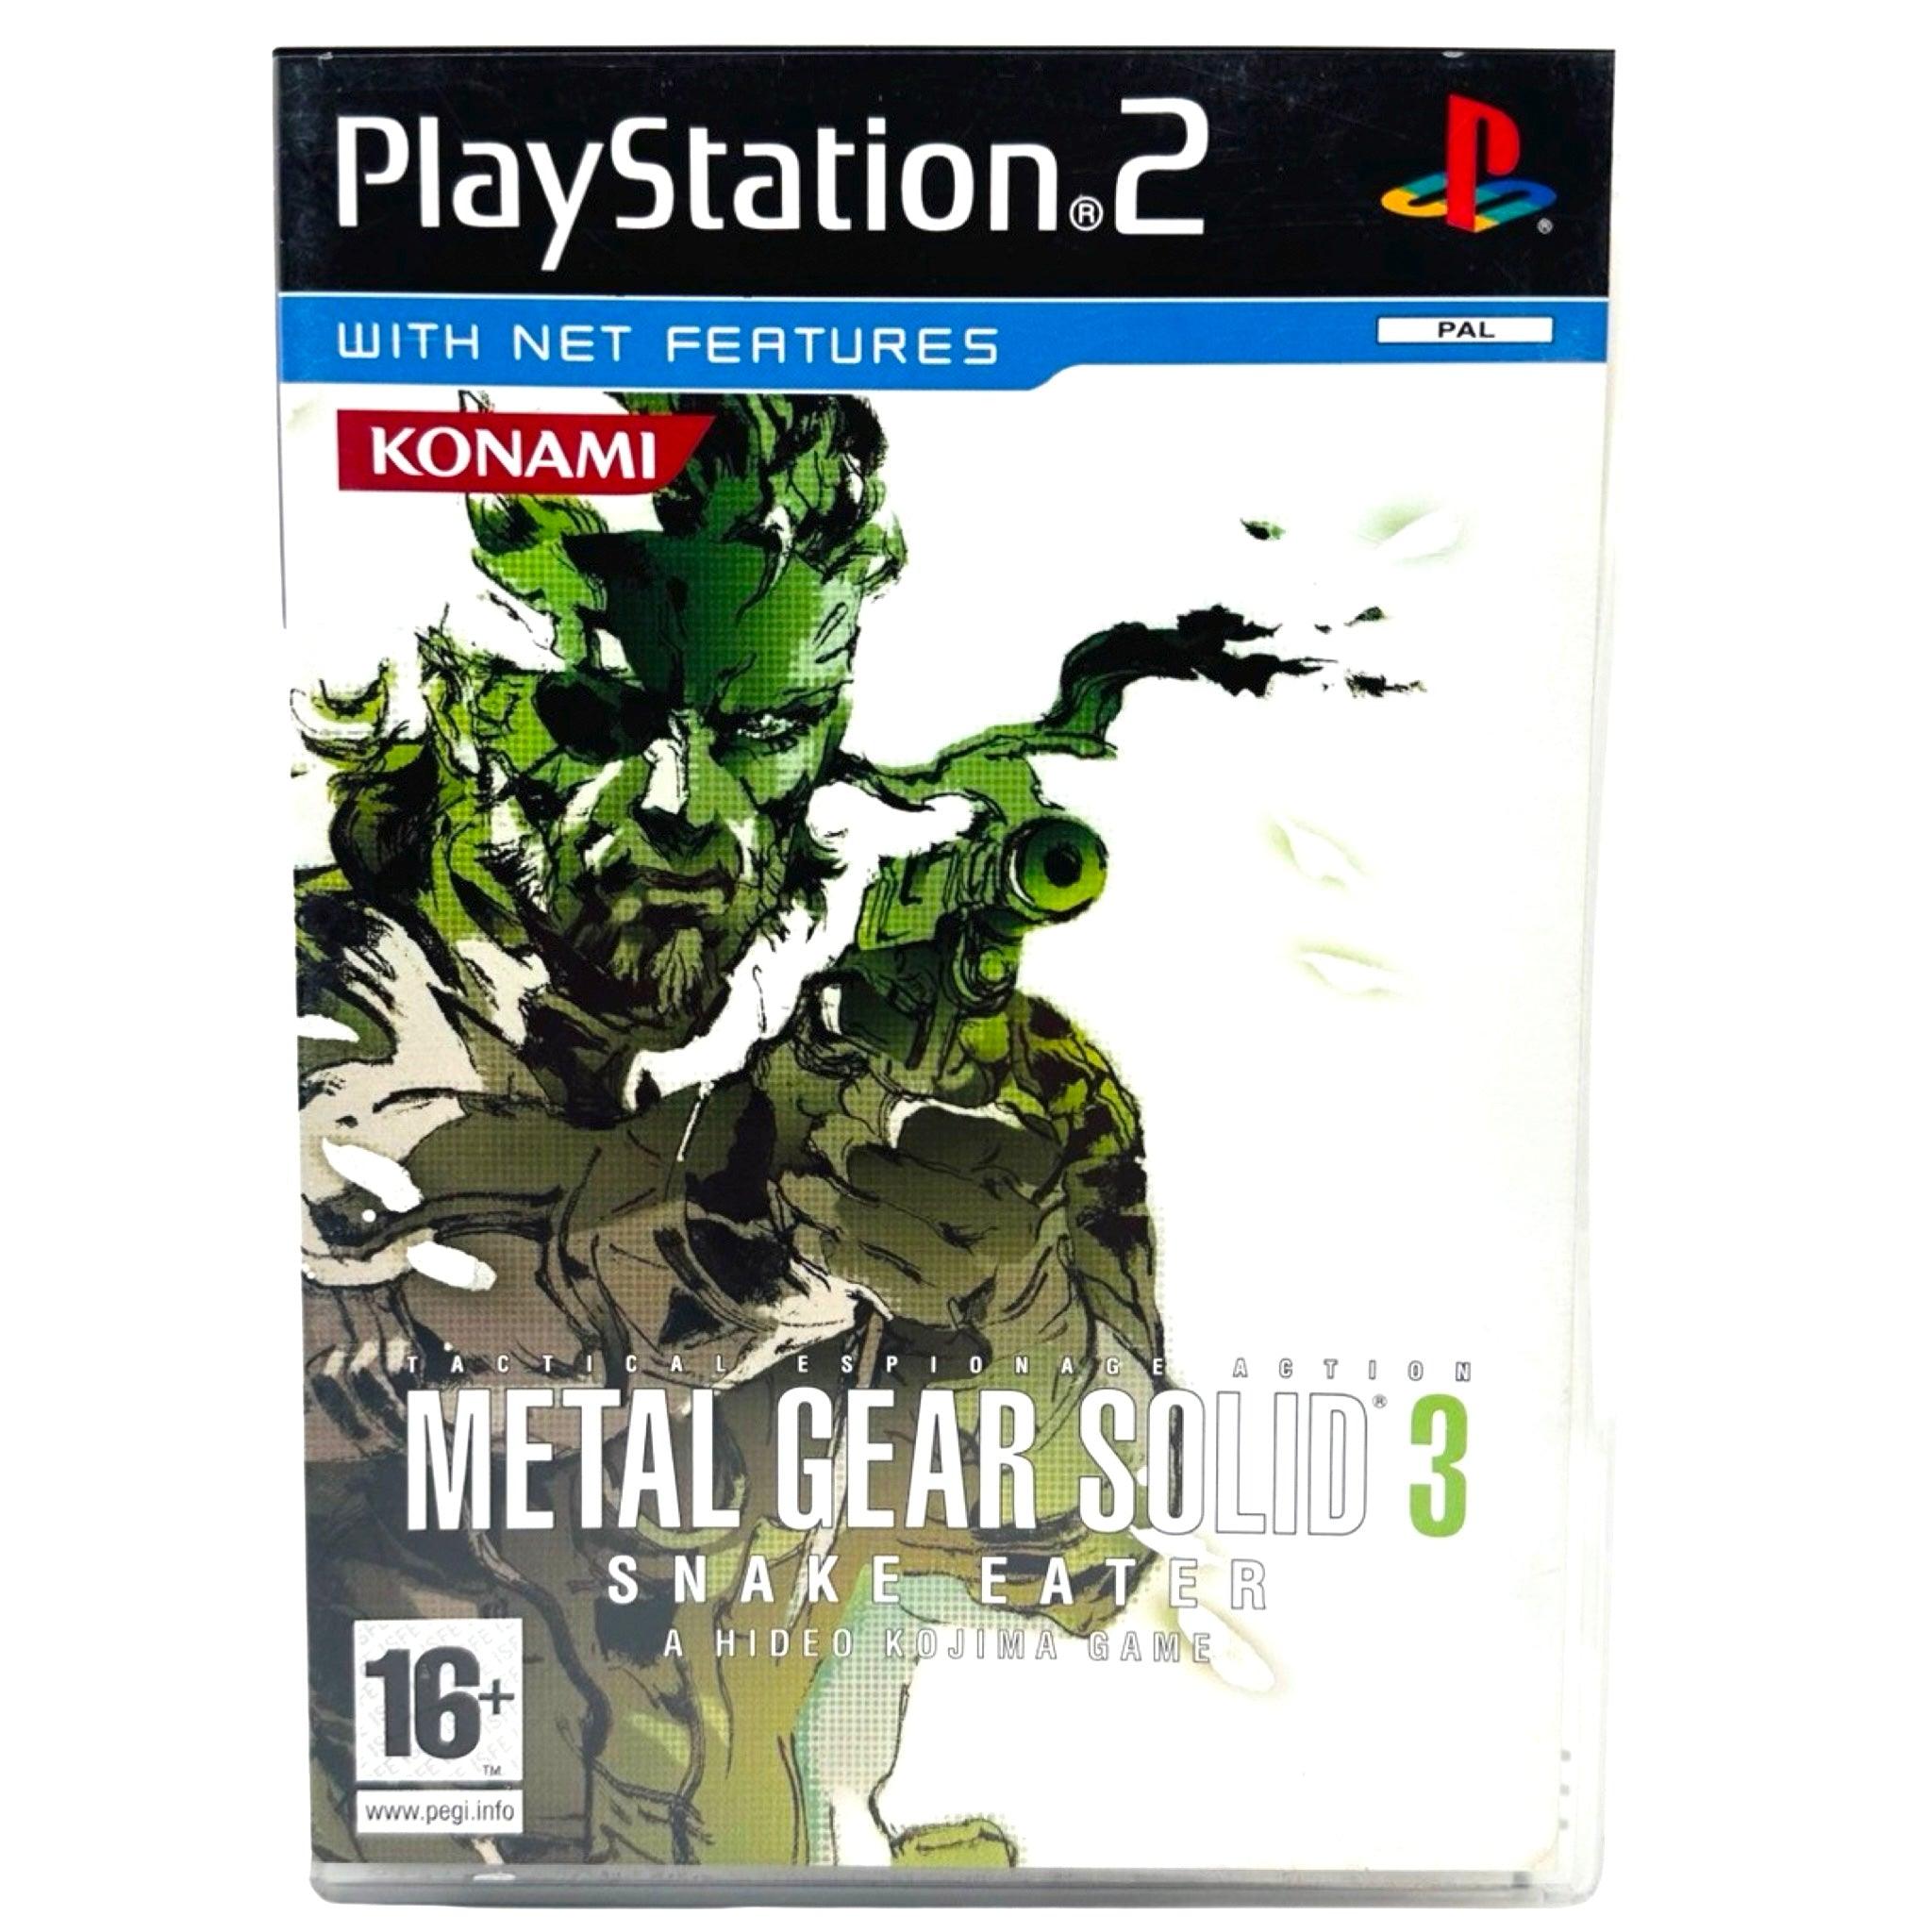 PS2: Metal Gear Solid 3 Snake Eater - RetroGaming.no